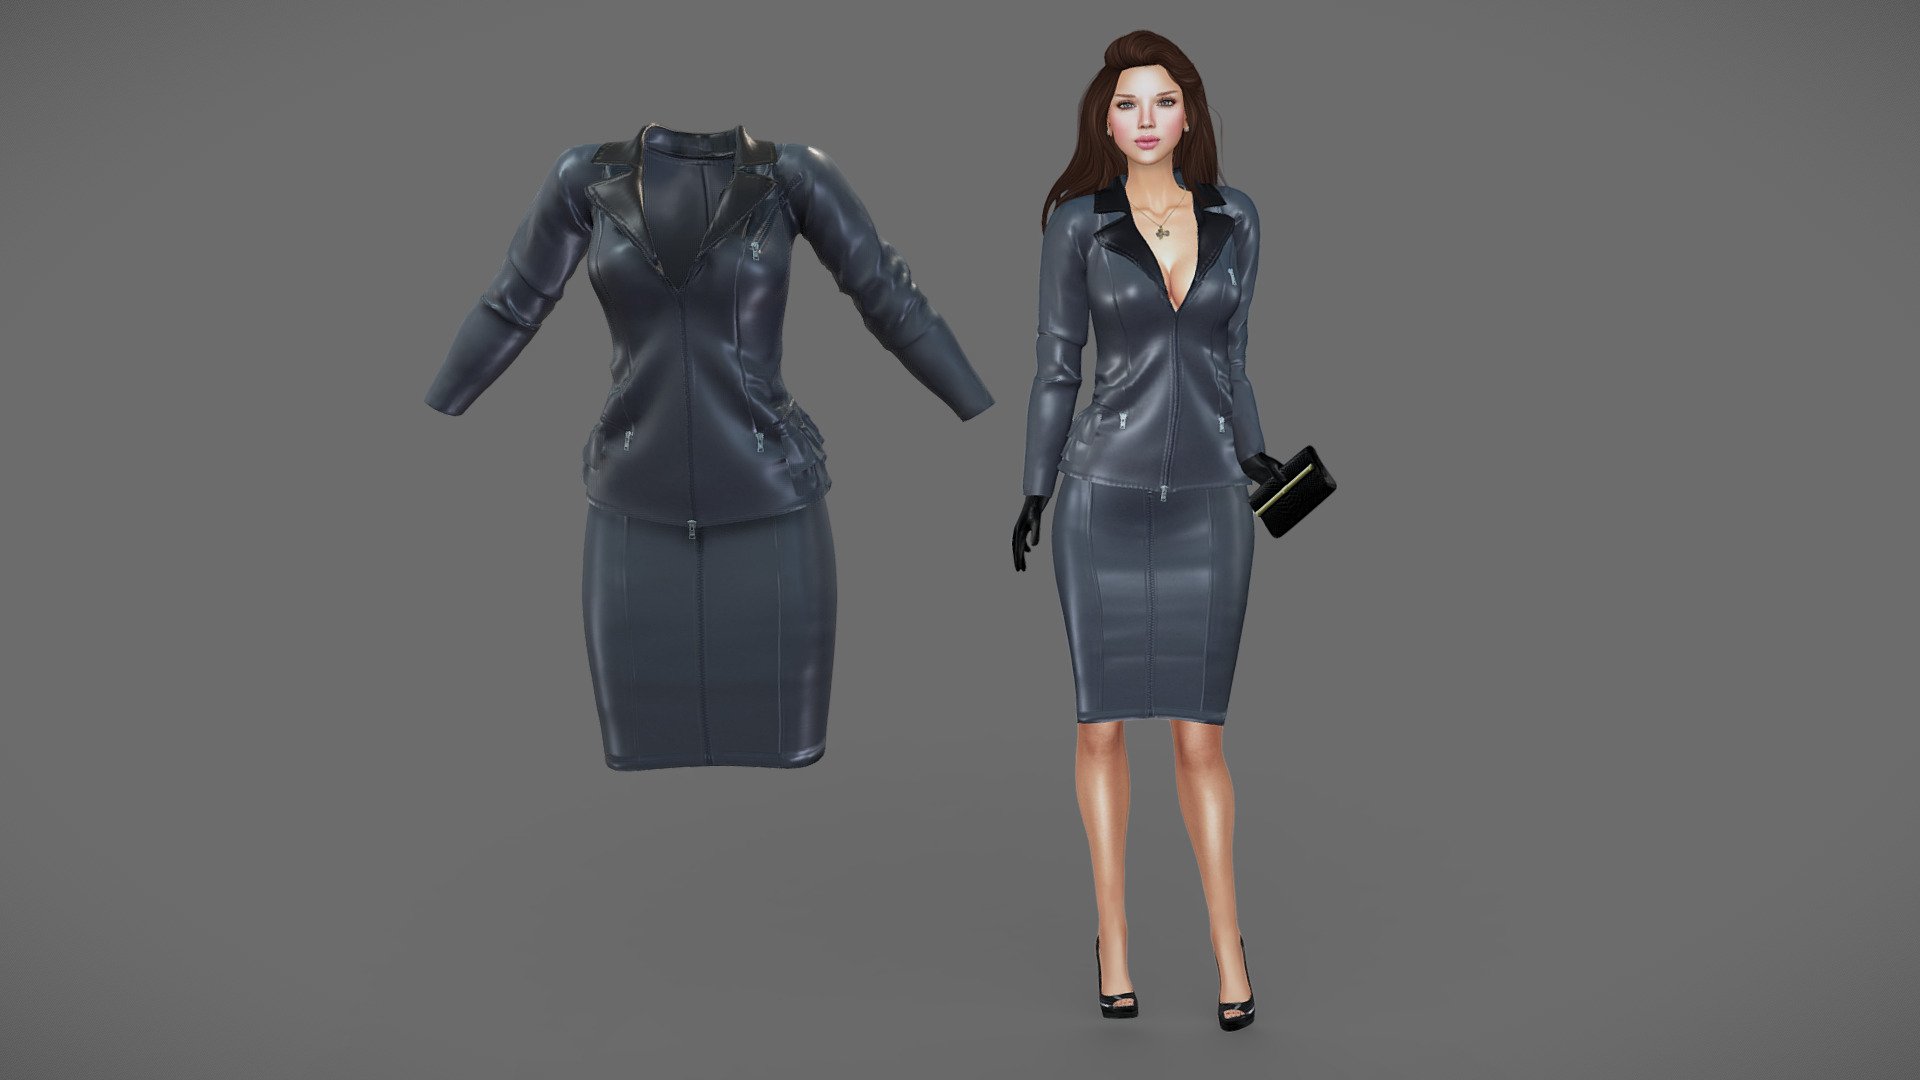 Skirt + Jacket (Seperate models)

Can be fitted to any character

Ready for games

Clean topology

No overlapping smart unwrapped UVs

High quality realistic textues

FBX, OBJ, gITF, USDZ (request other formats)

PBR or Classic

Please ask for any other questions

Type     user:3dia &ldquo;search term